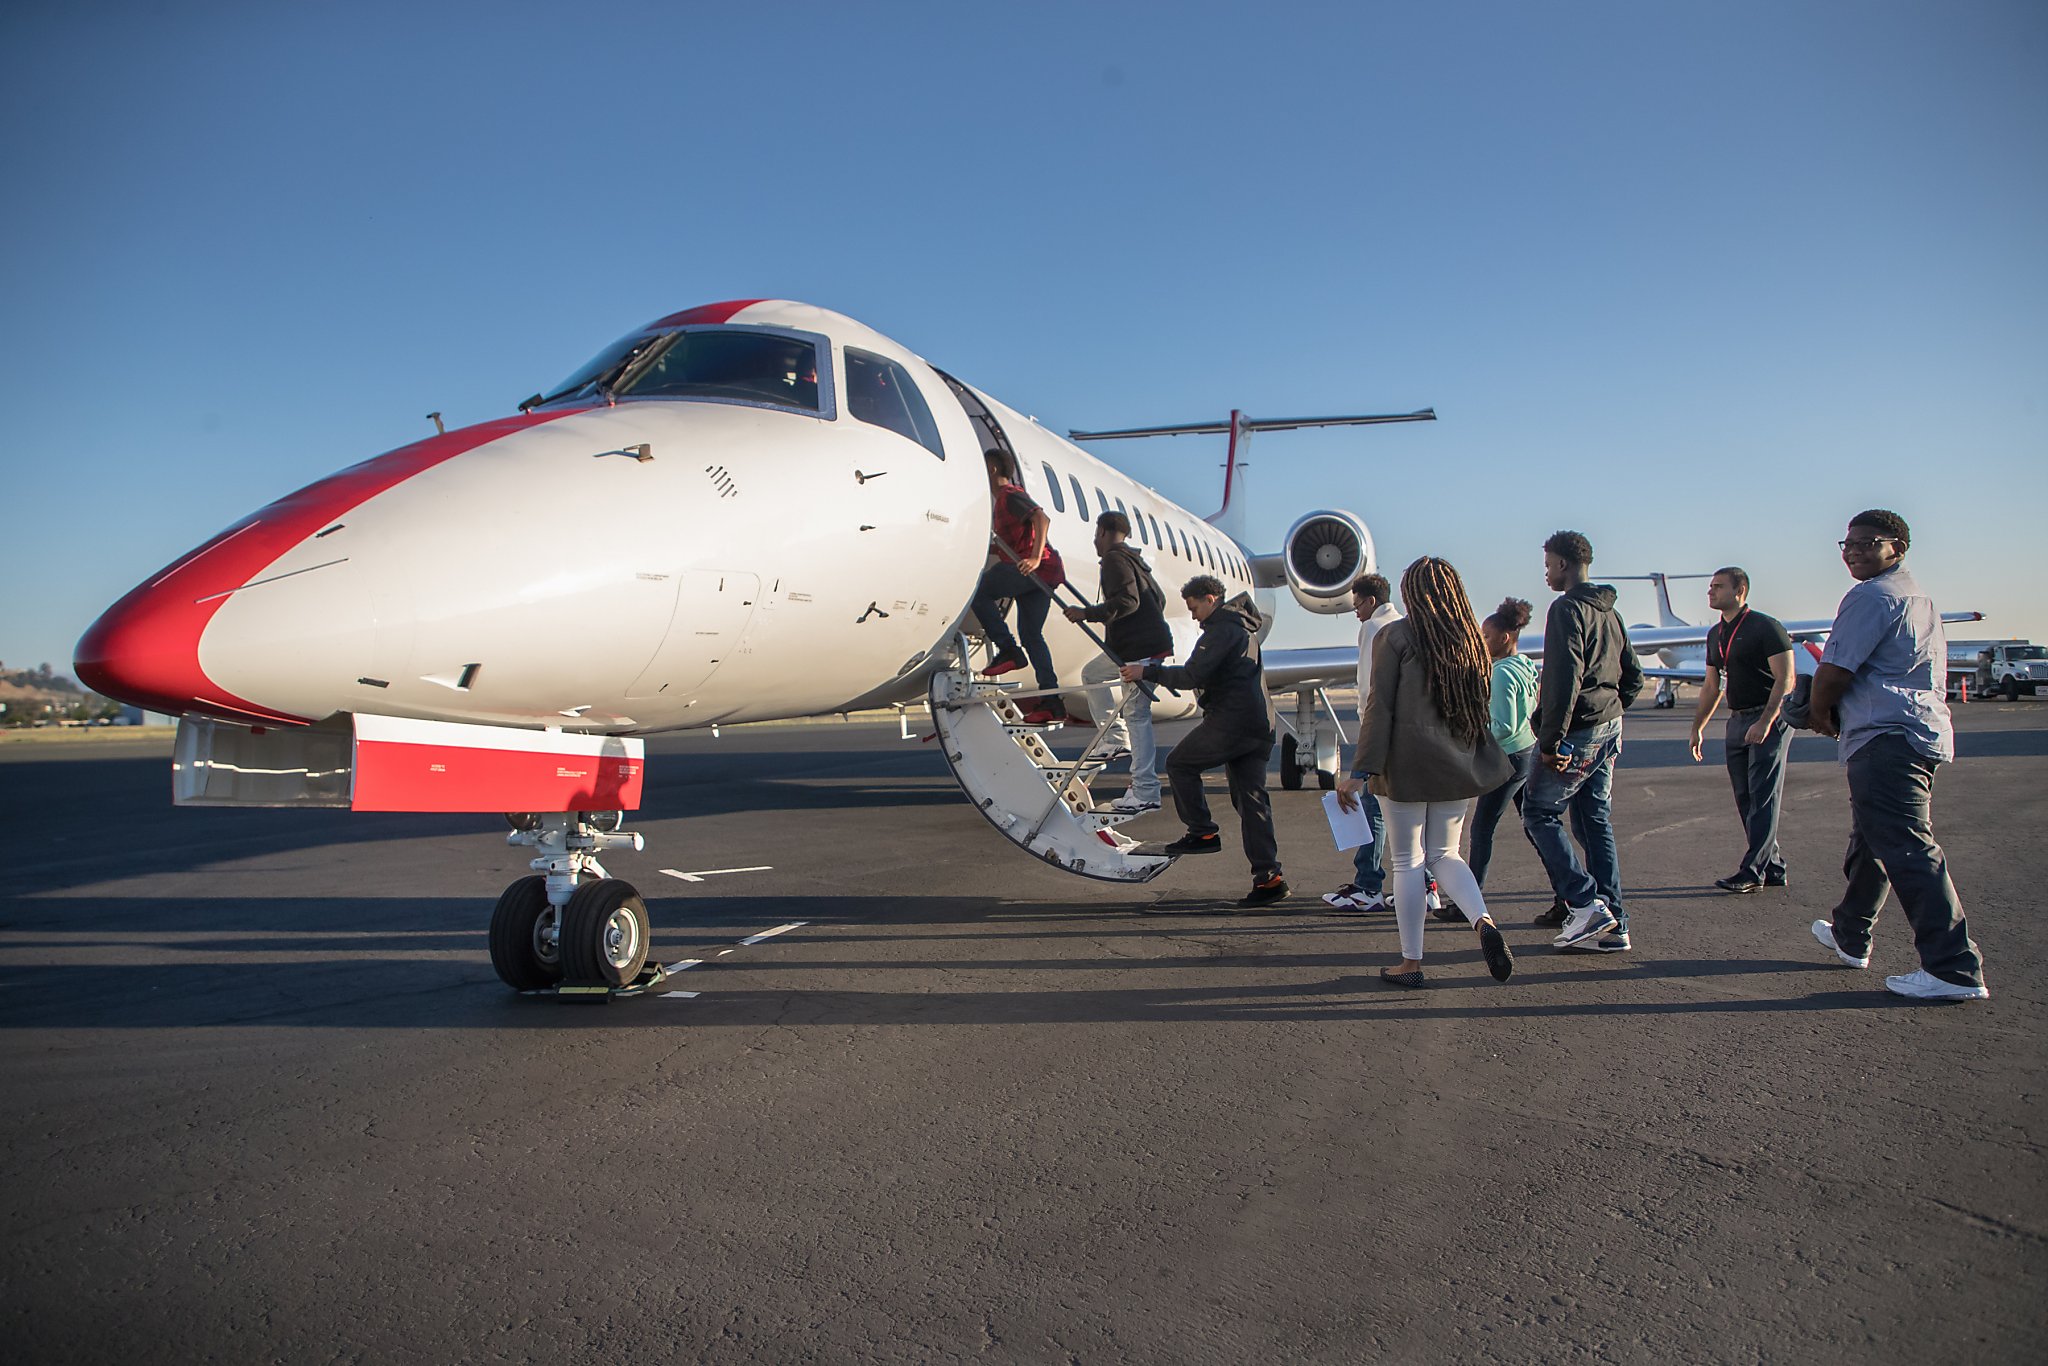 JetSuiteX's $129 semi-private flight service between Oakland and Burbank launches this ...2048 x 1366